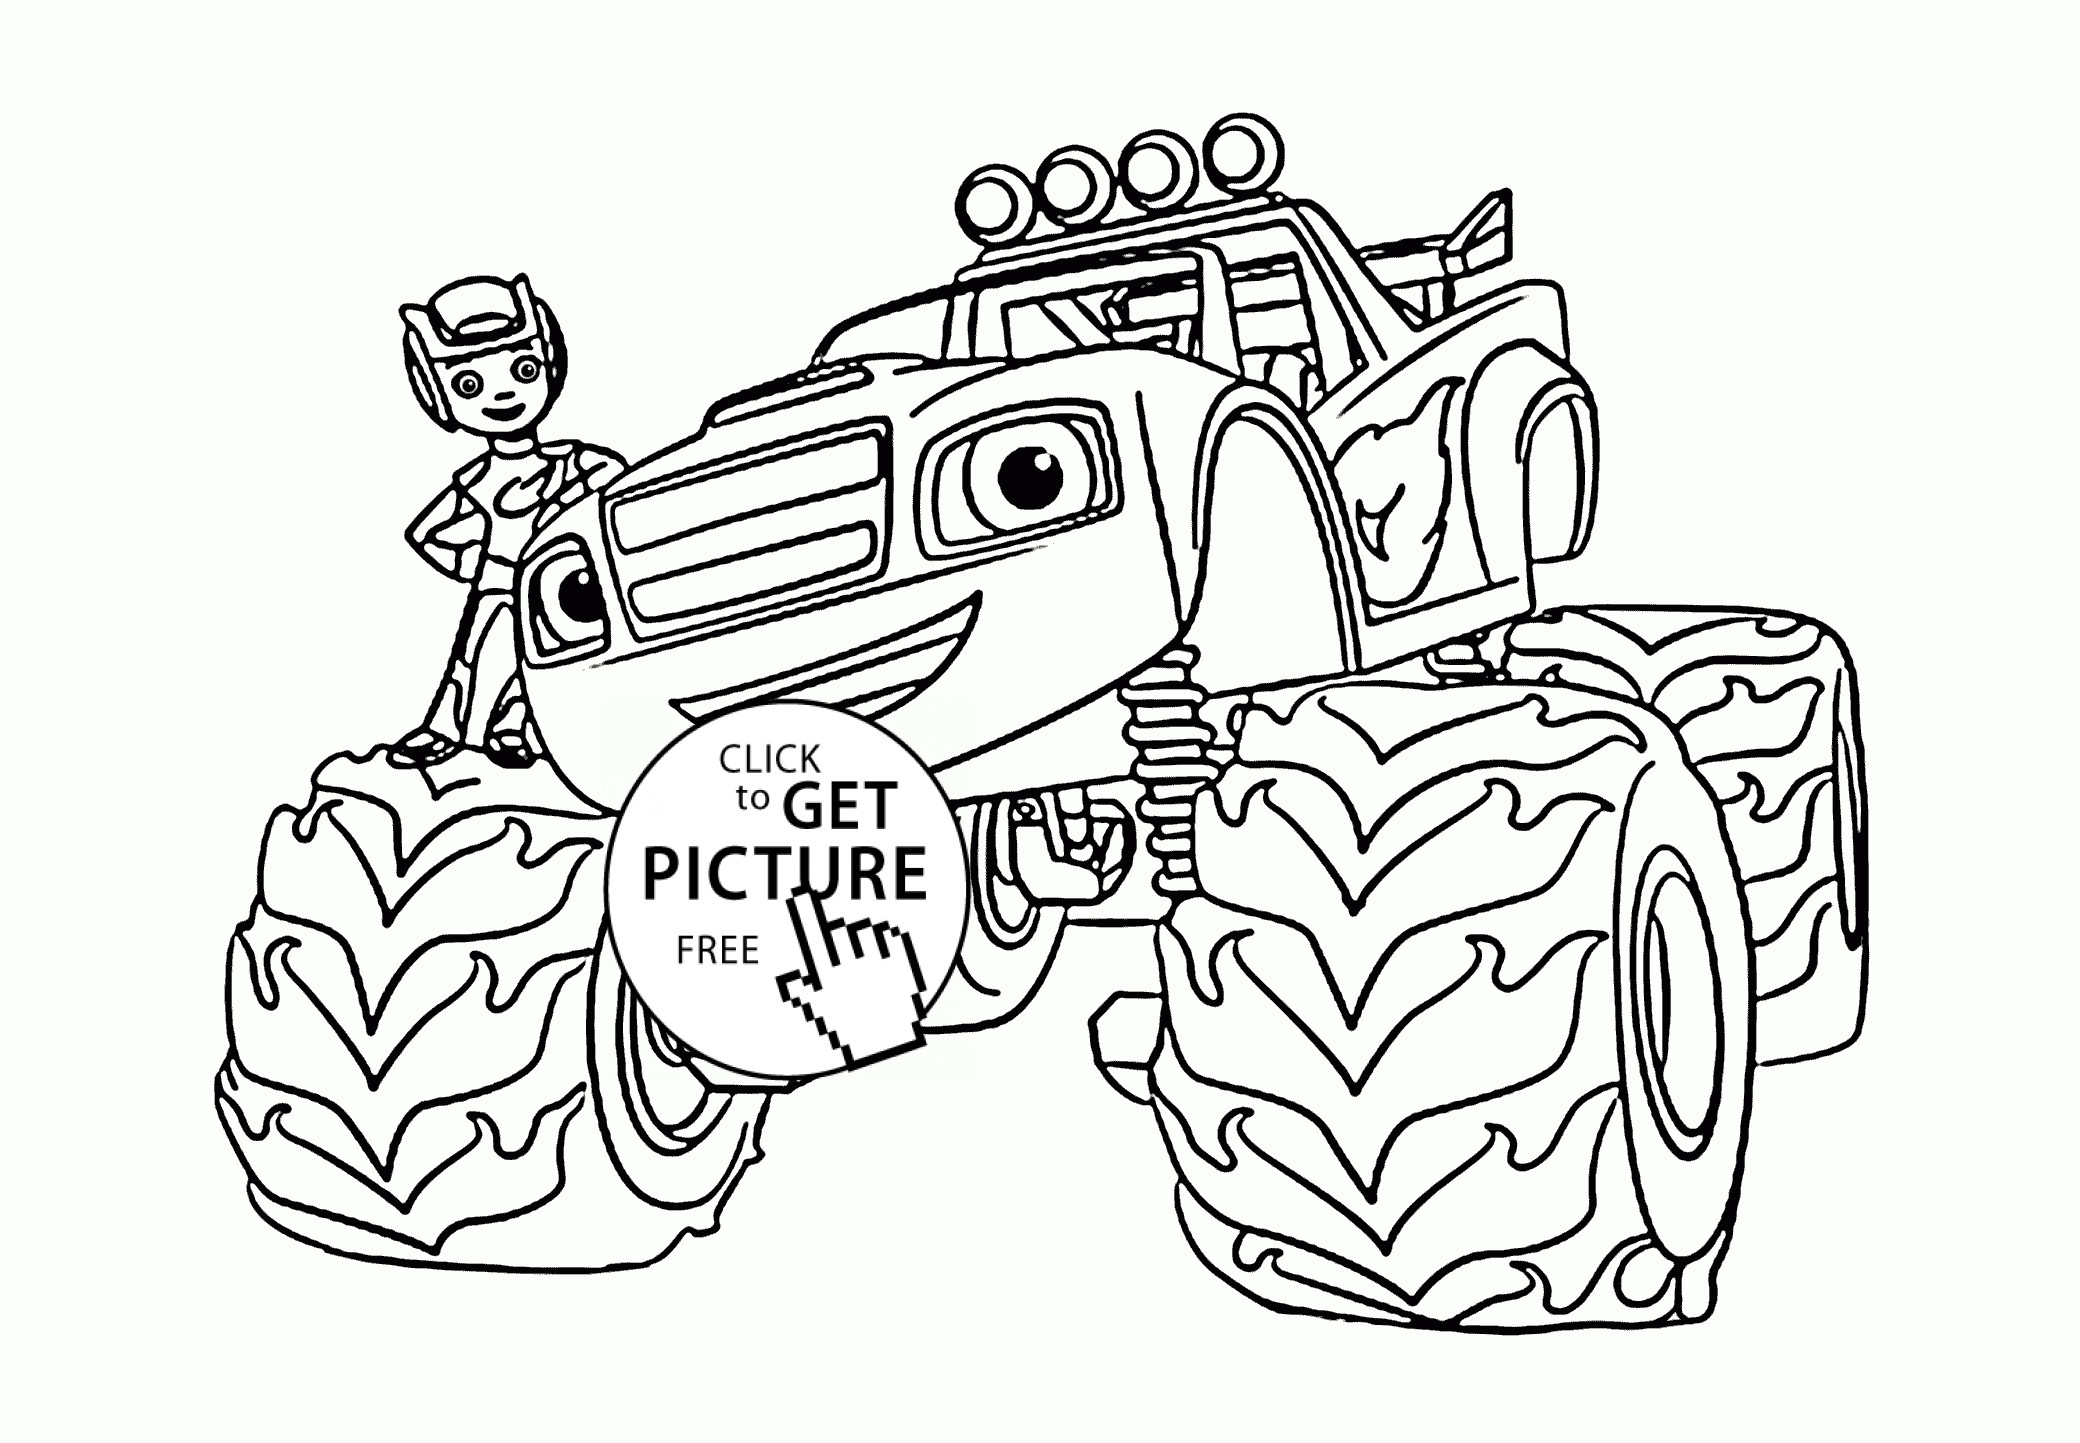 Coloring Pages For Boys Blaze
 Blaze Monster Truck with Boy coloring page for kids